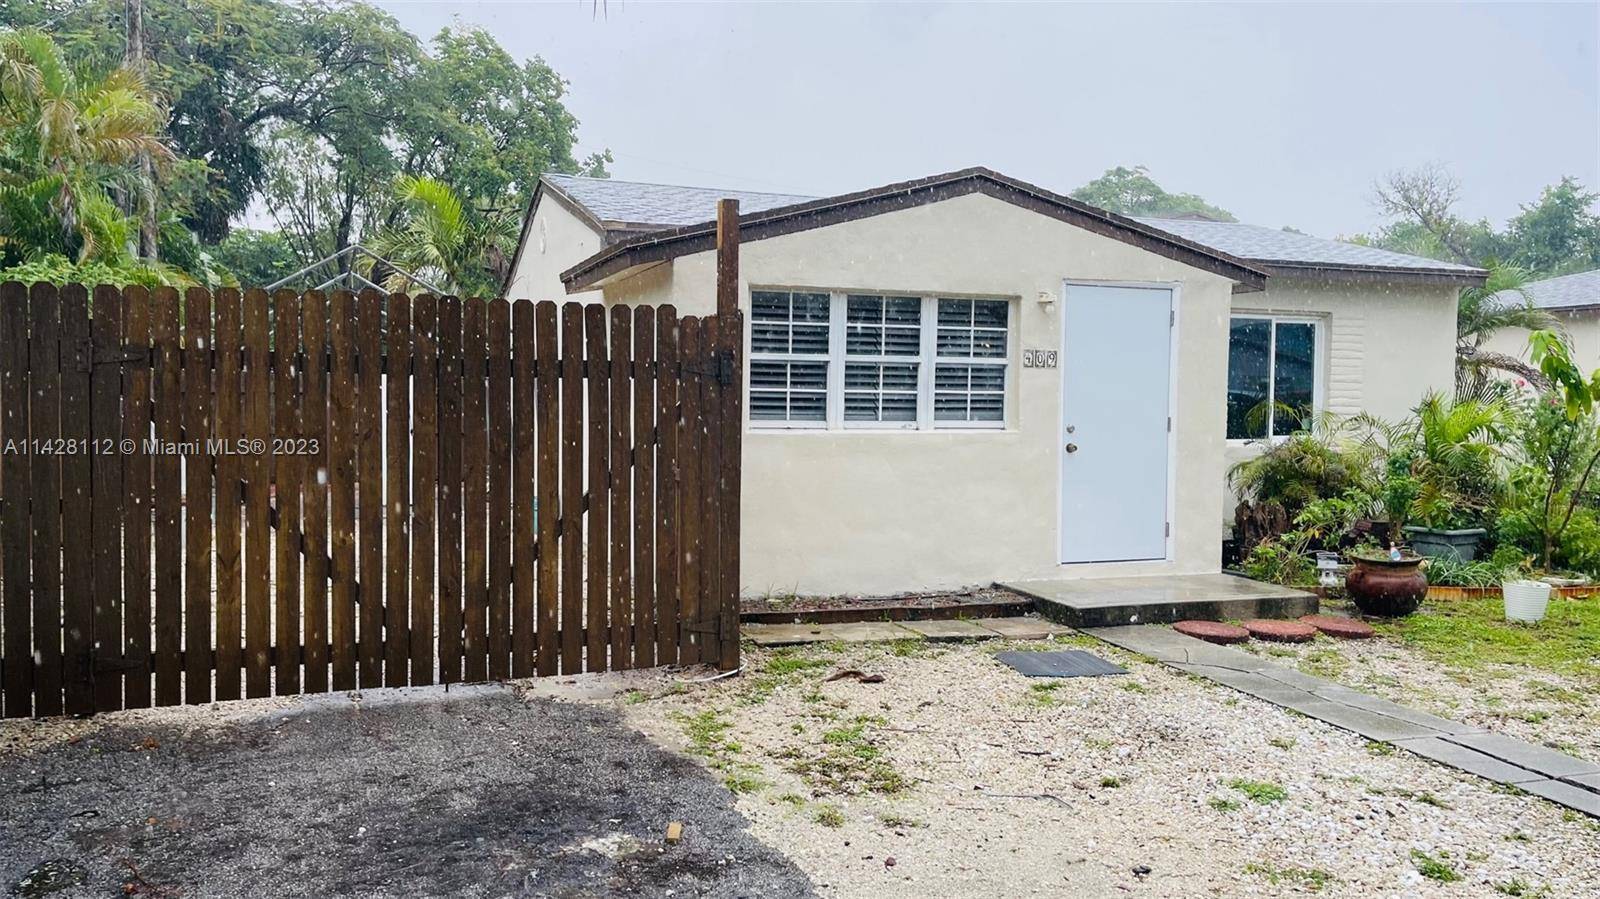 LOCATION LOCATION INVESTMENT OPPORTUNITY IN A GREAT LOCATION Great downtown investment opportunity, great location near airport beach One single family 2 bedroom 1 bath, Currently being used as rental housing.